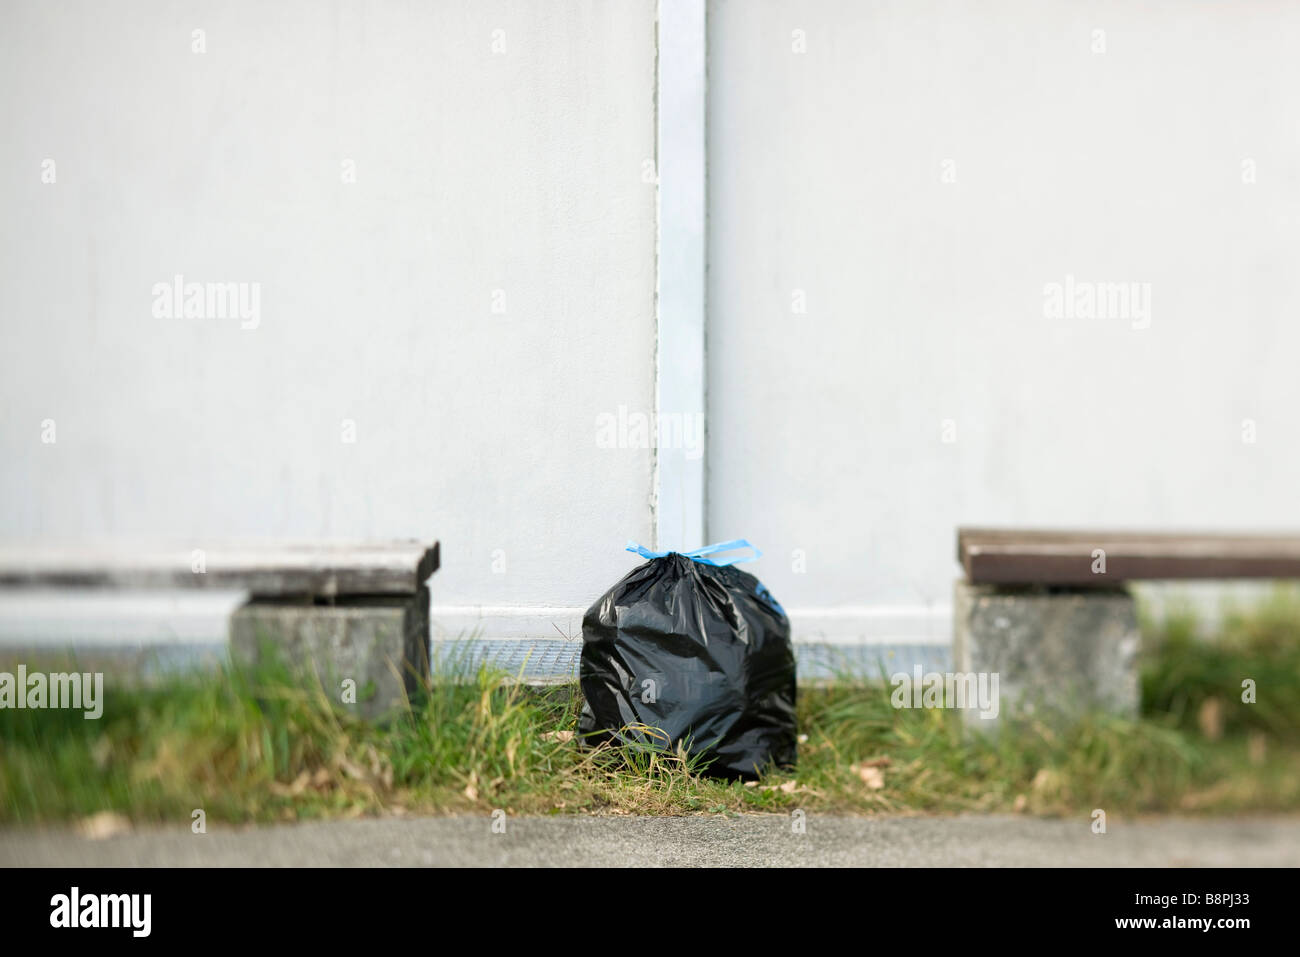 Garbage bag sitting on ground between two benches Stock Photo